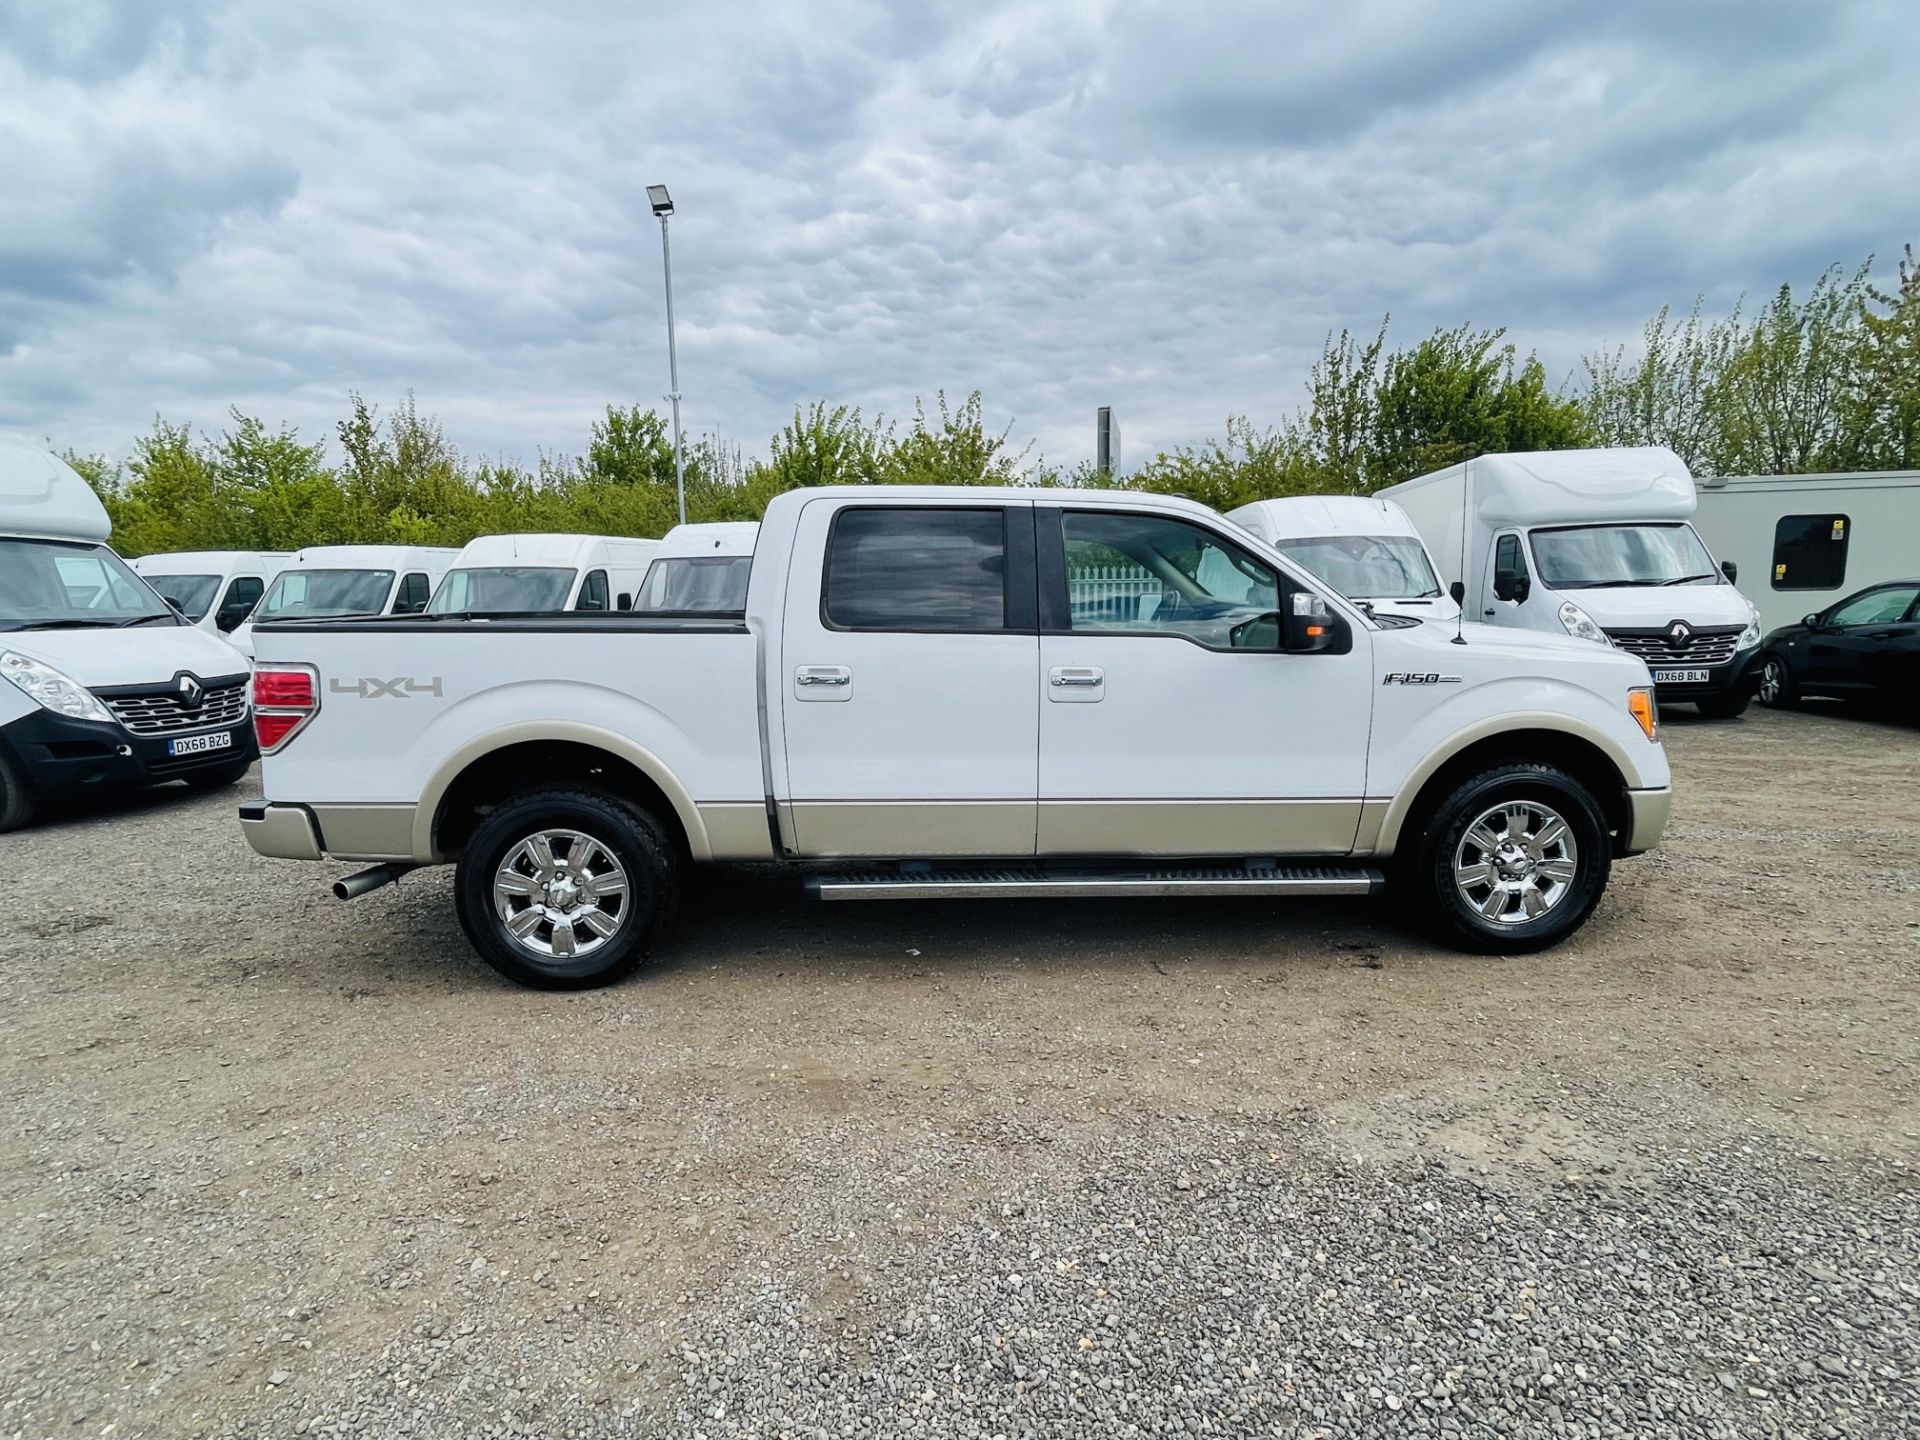 ** ON SALE ** Ford F-150 5.4L V8 Lariat Supercrew 4WD ' 2010 Year' A/C - Full Spec - ULEZ Compliant - Image 13 of 29